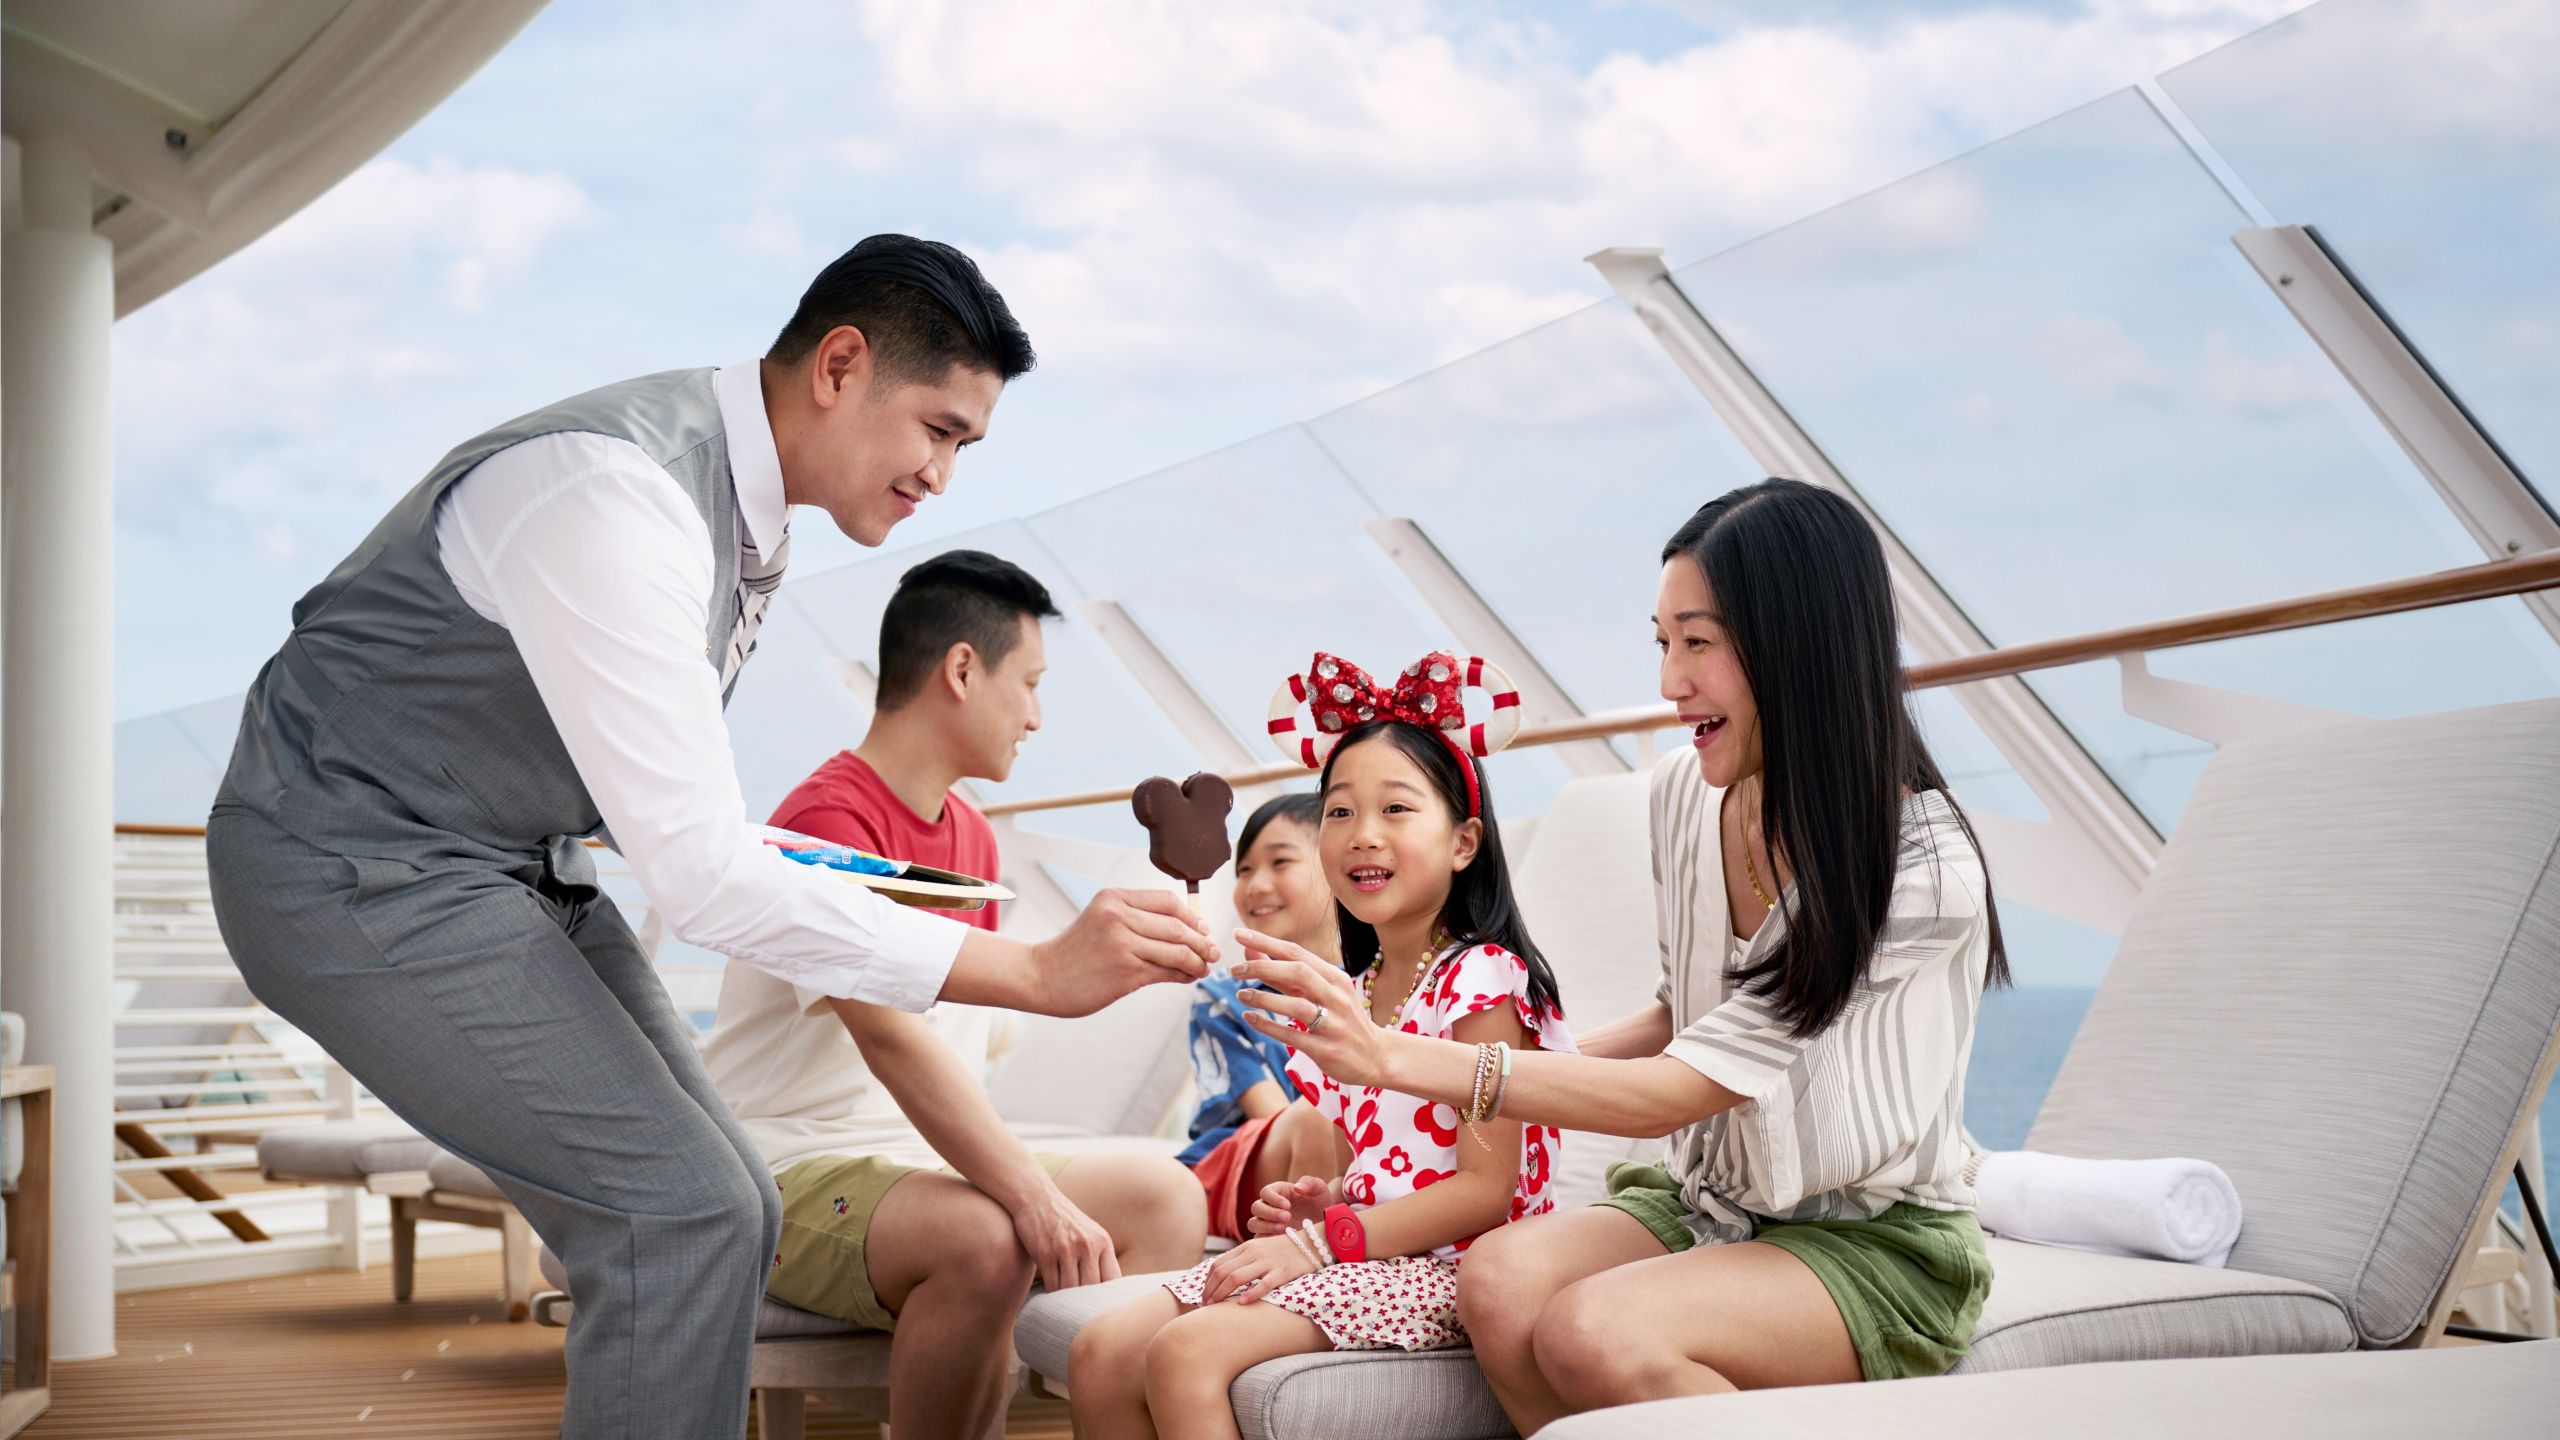 A Cast Member giving a Mickey Mouse shaped ice cream bar to a woman relaxing with her family on the upper deck of a Disney Cruise Line ship